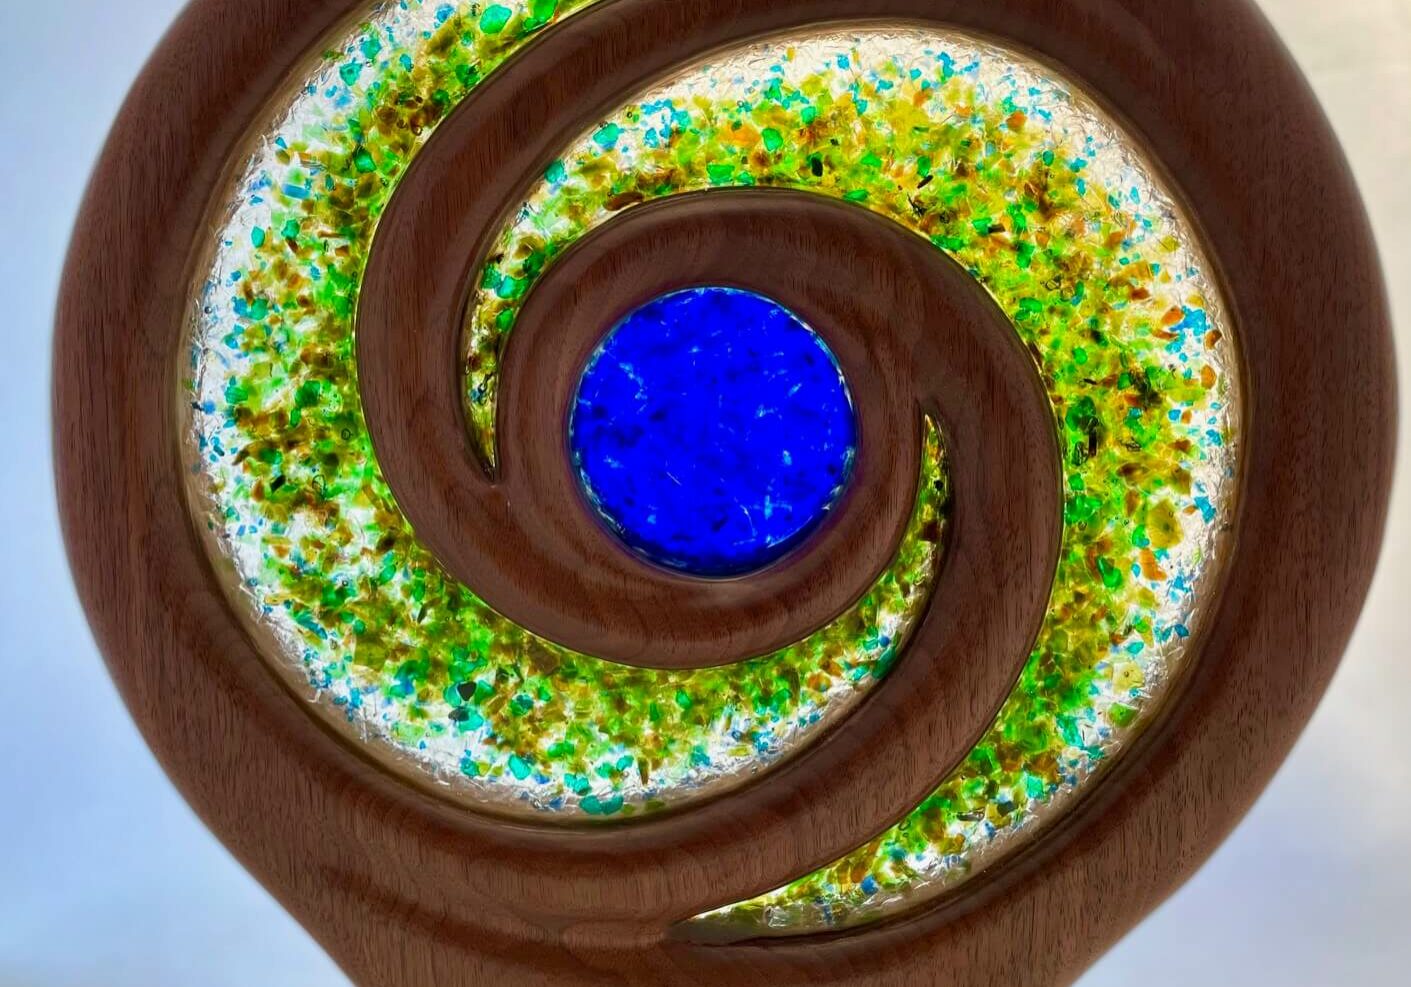 Beautiful green and blue glass sand aggregate artwork